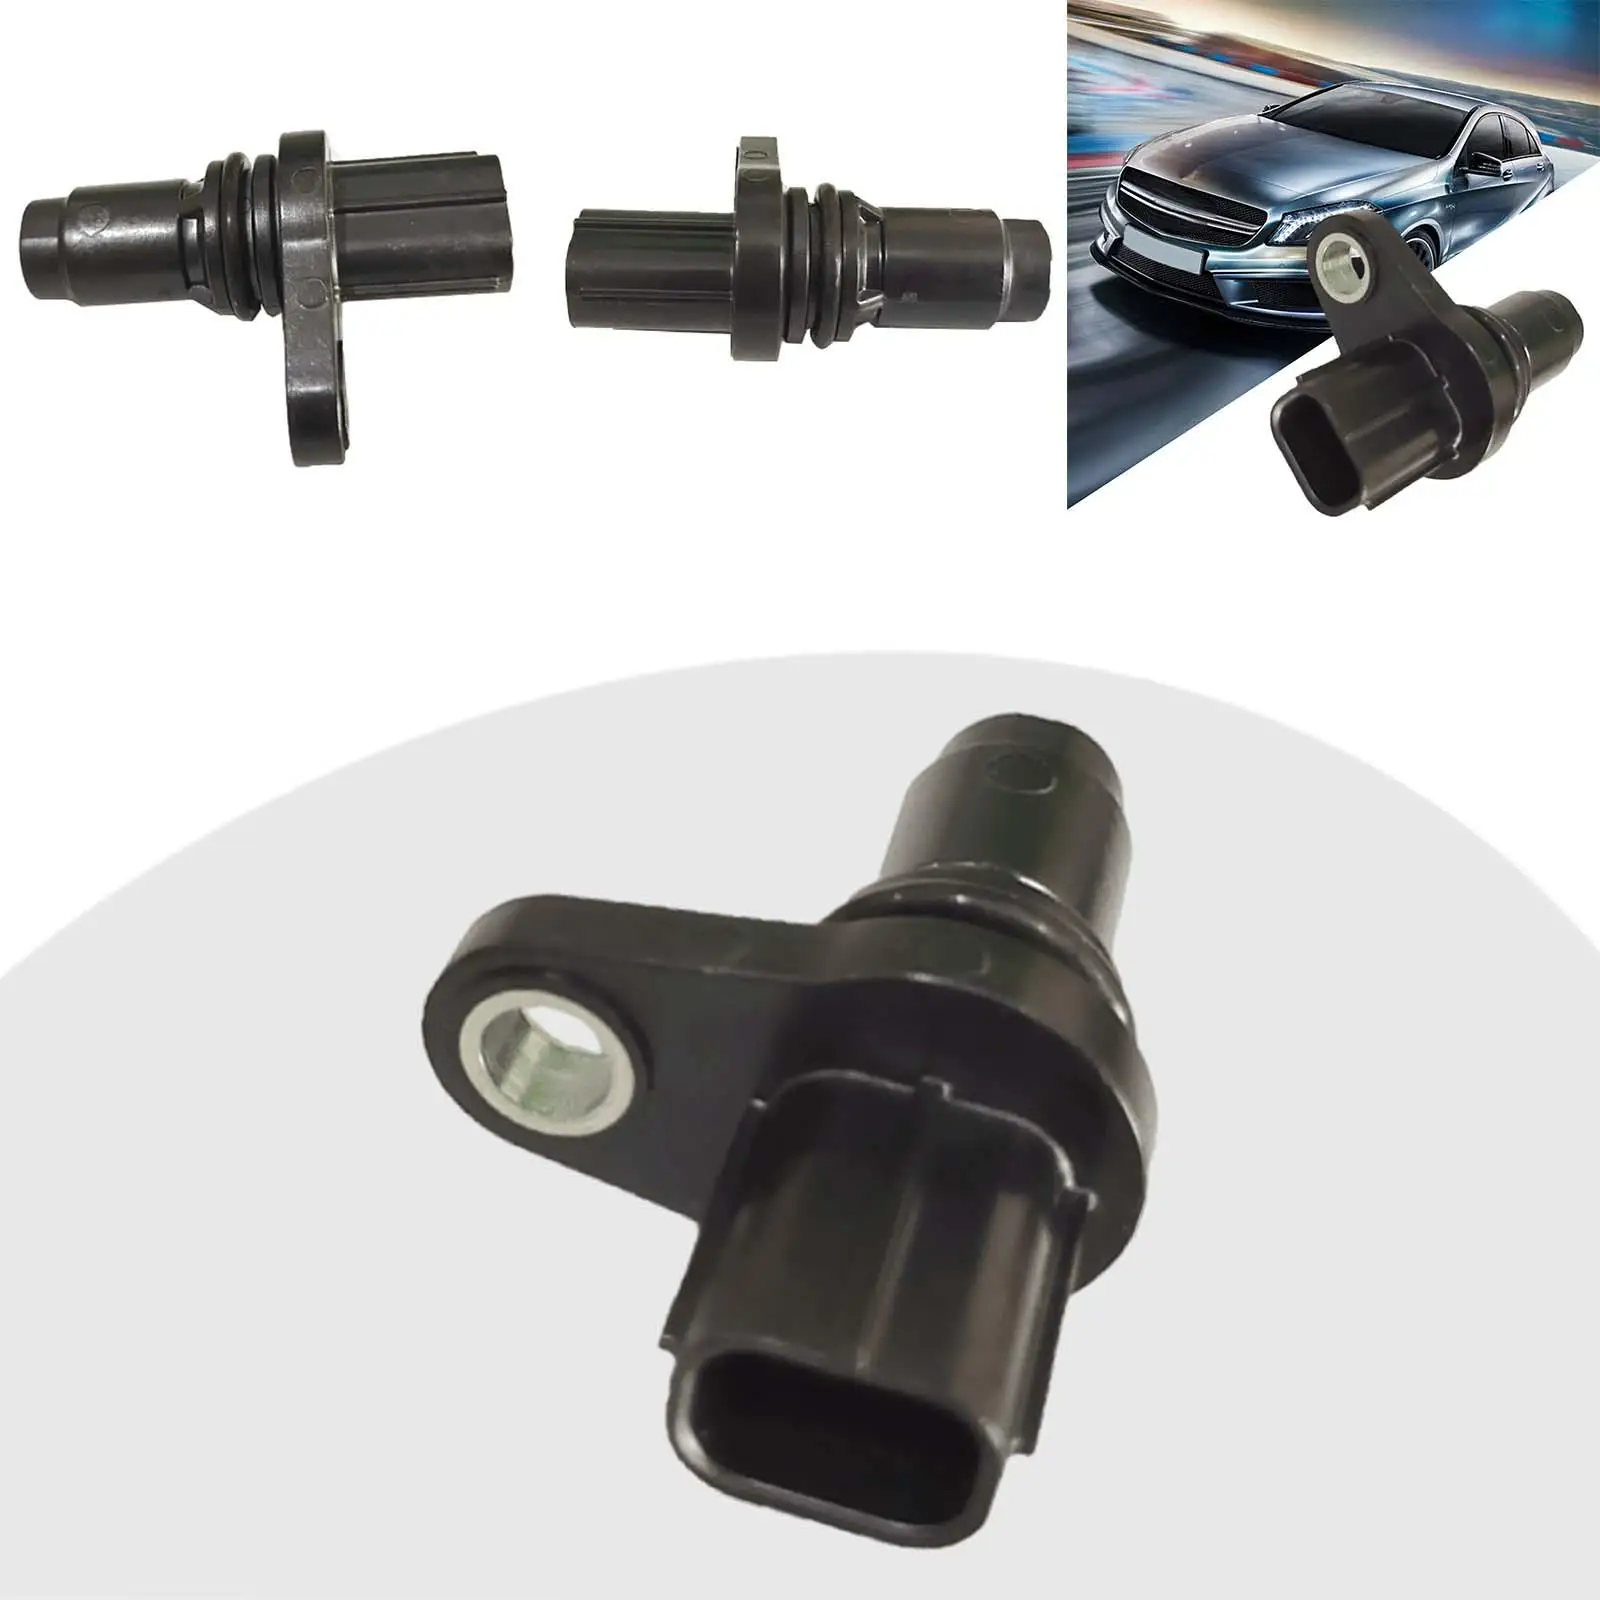 Crankshaft Position Sensor R2AA-18-221A Replace Parts for Mazda 3 BL 6 GH Replacement Lightweight Professional Black Color